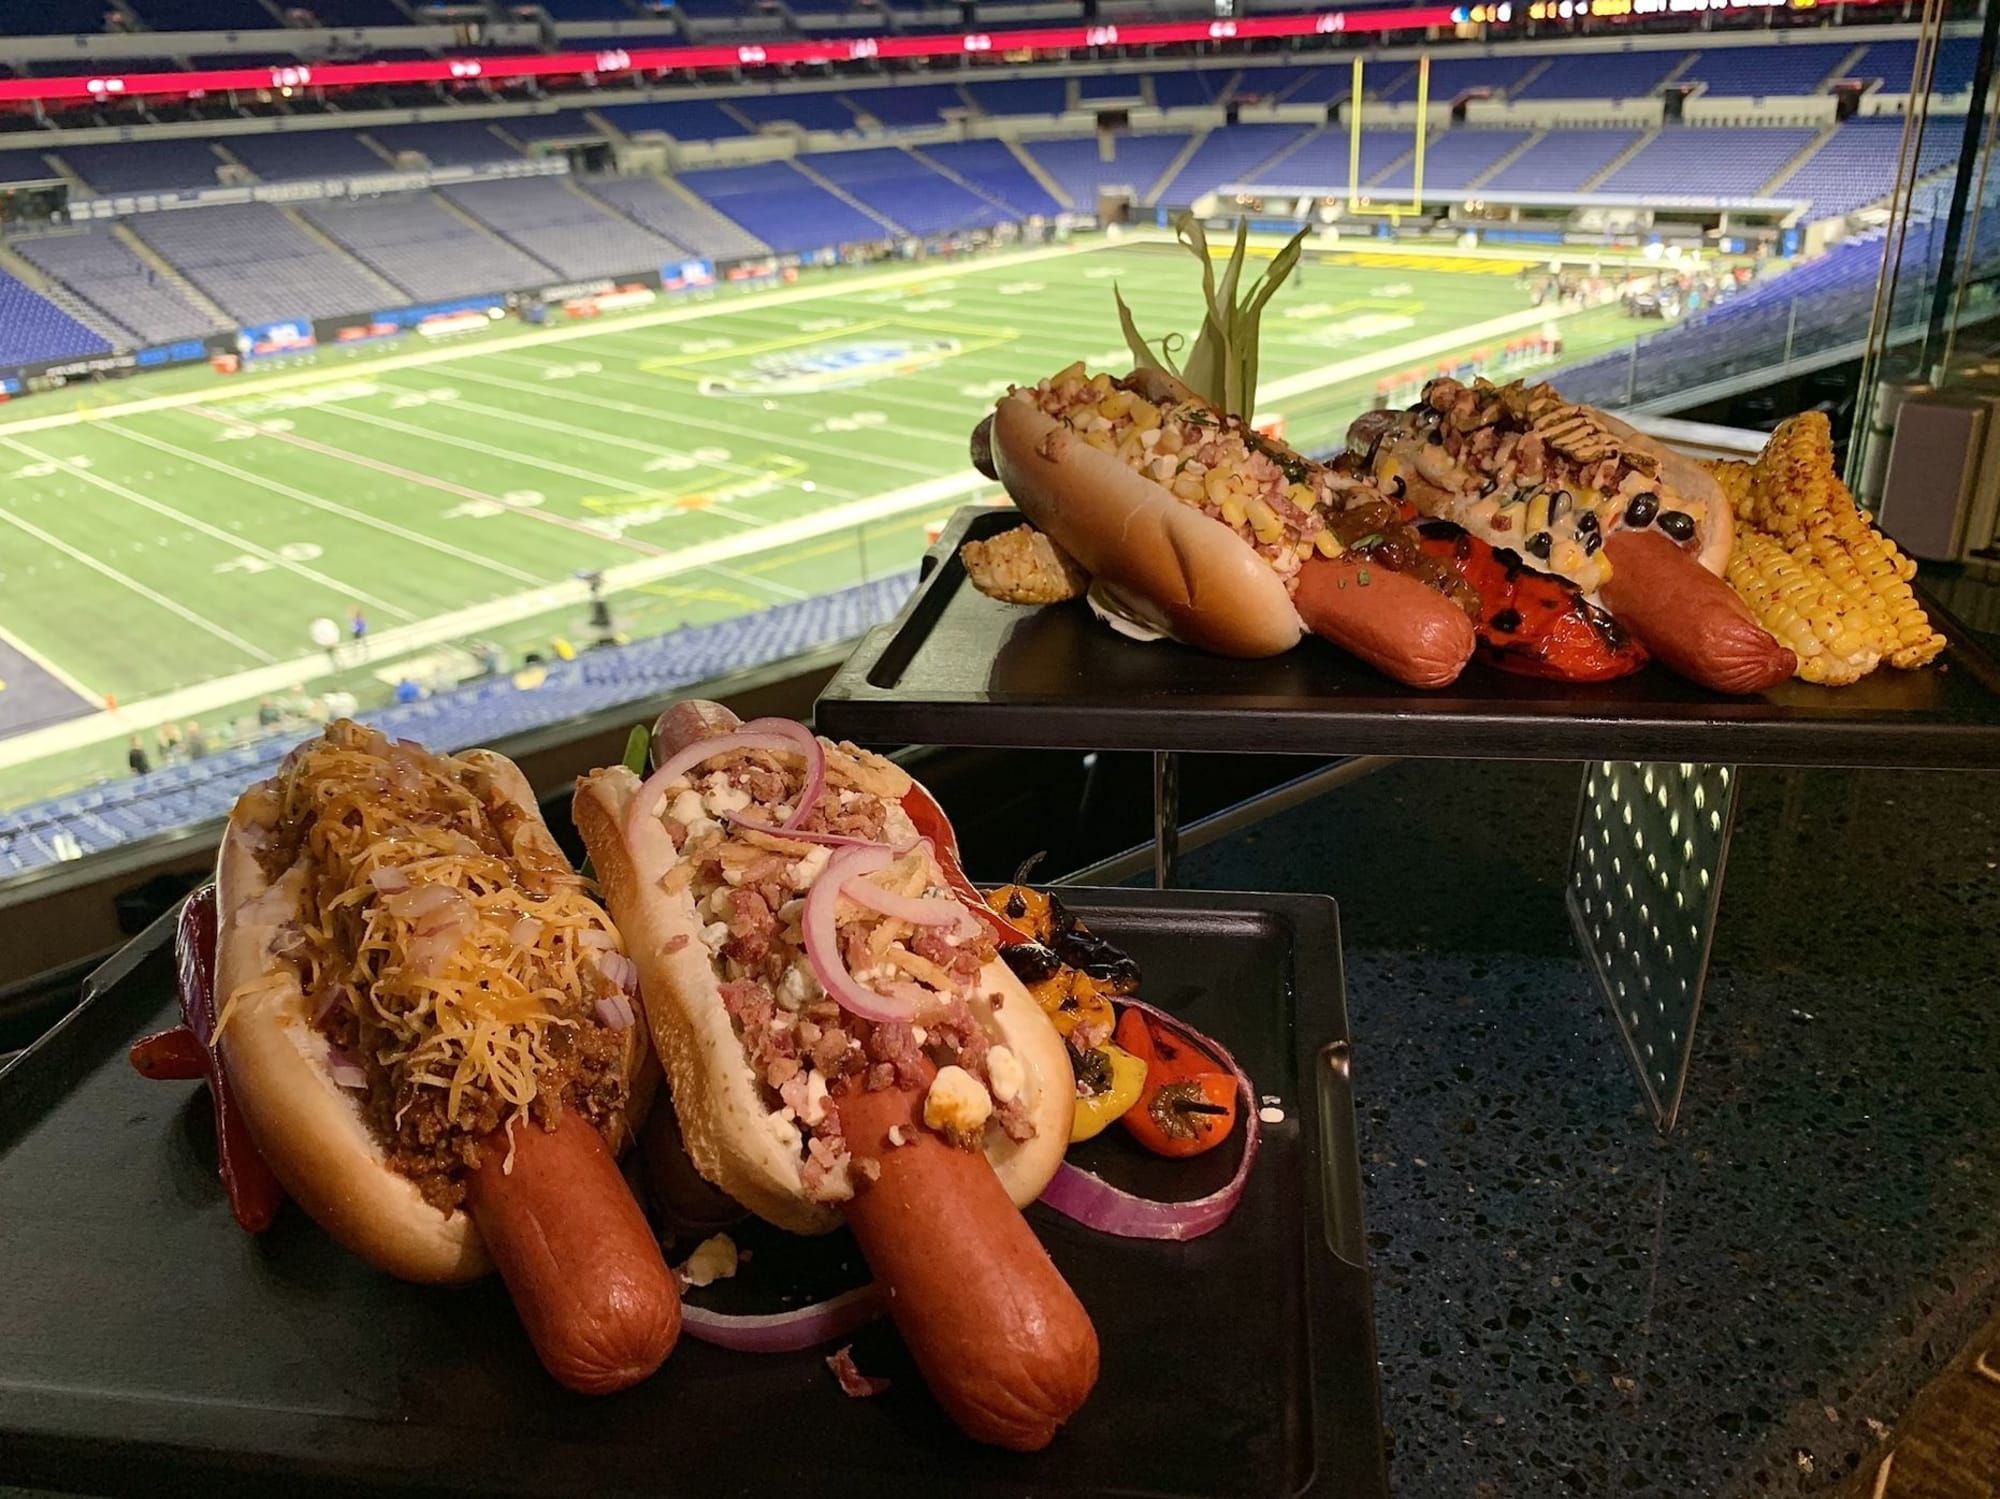 2023 Big 10 Championship menu is the battle of the loaded dogs